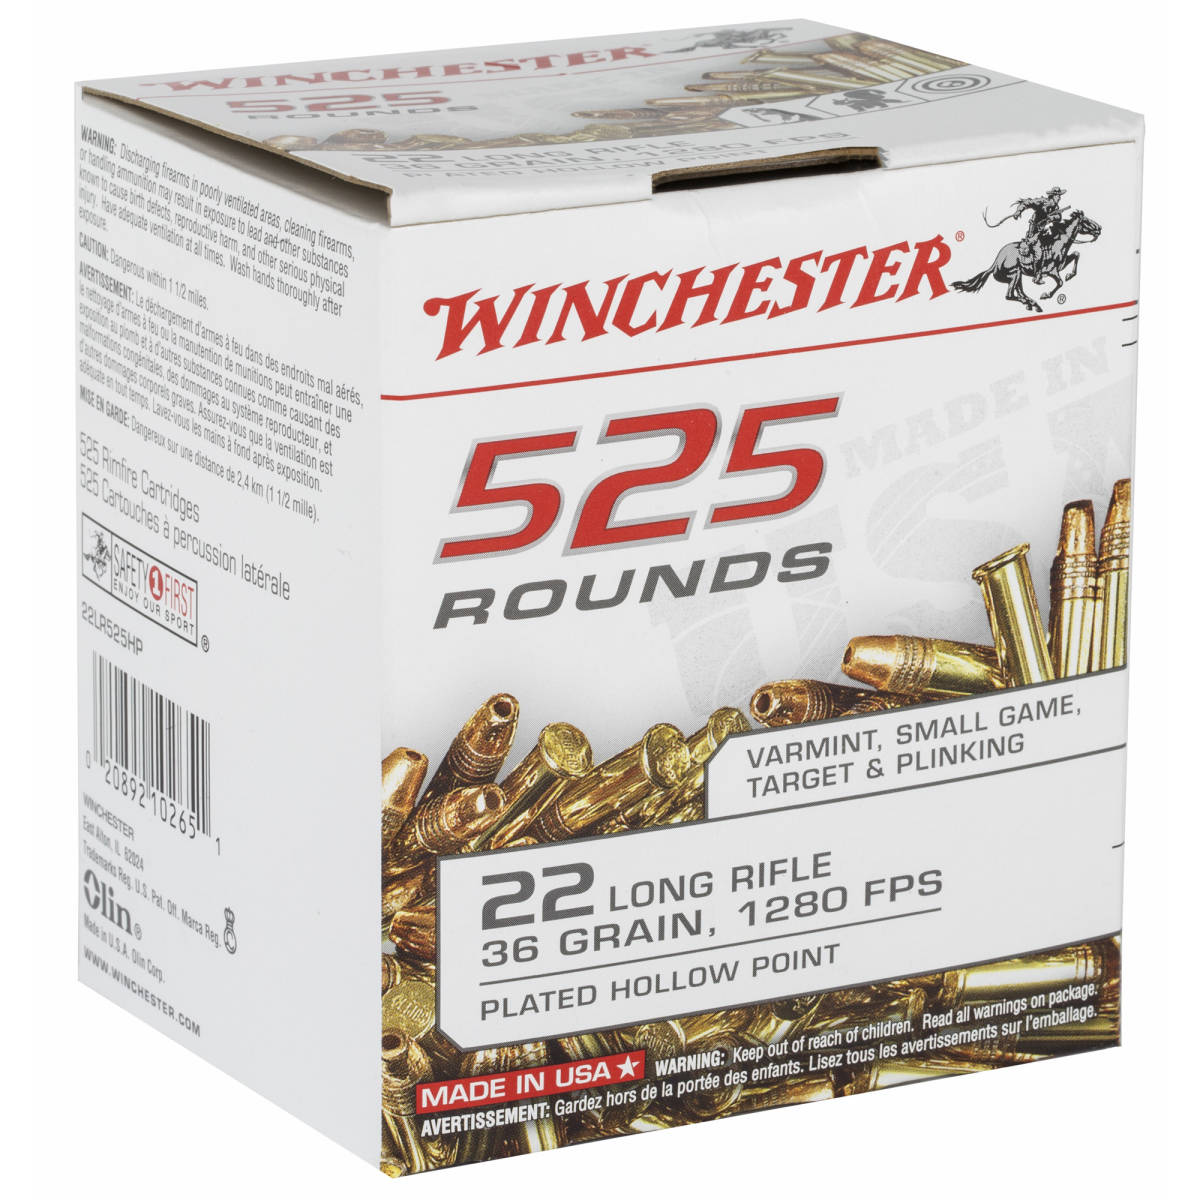 525 ROUNDS WINCHESTER 22LR 36 GR CP HOLLOW POINT 22 LR AMMO AMMUNITION-img-1